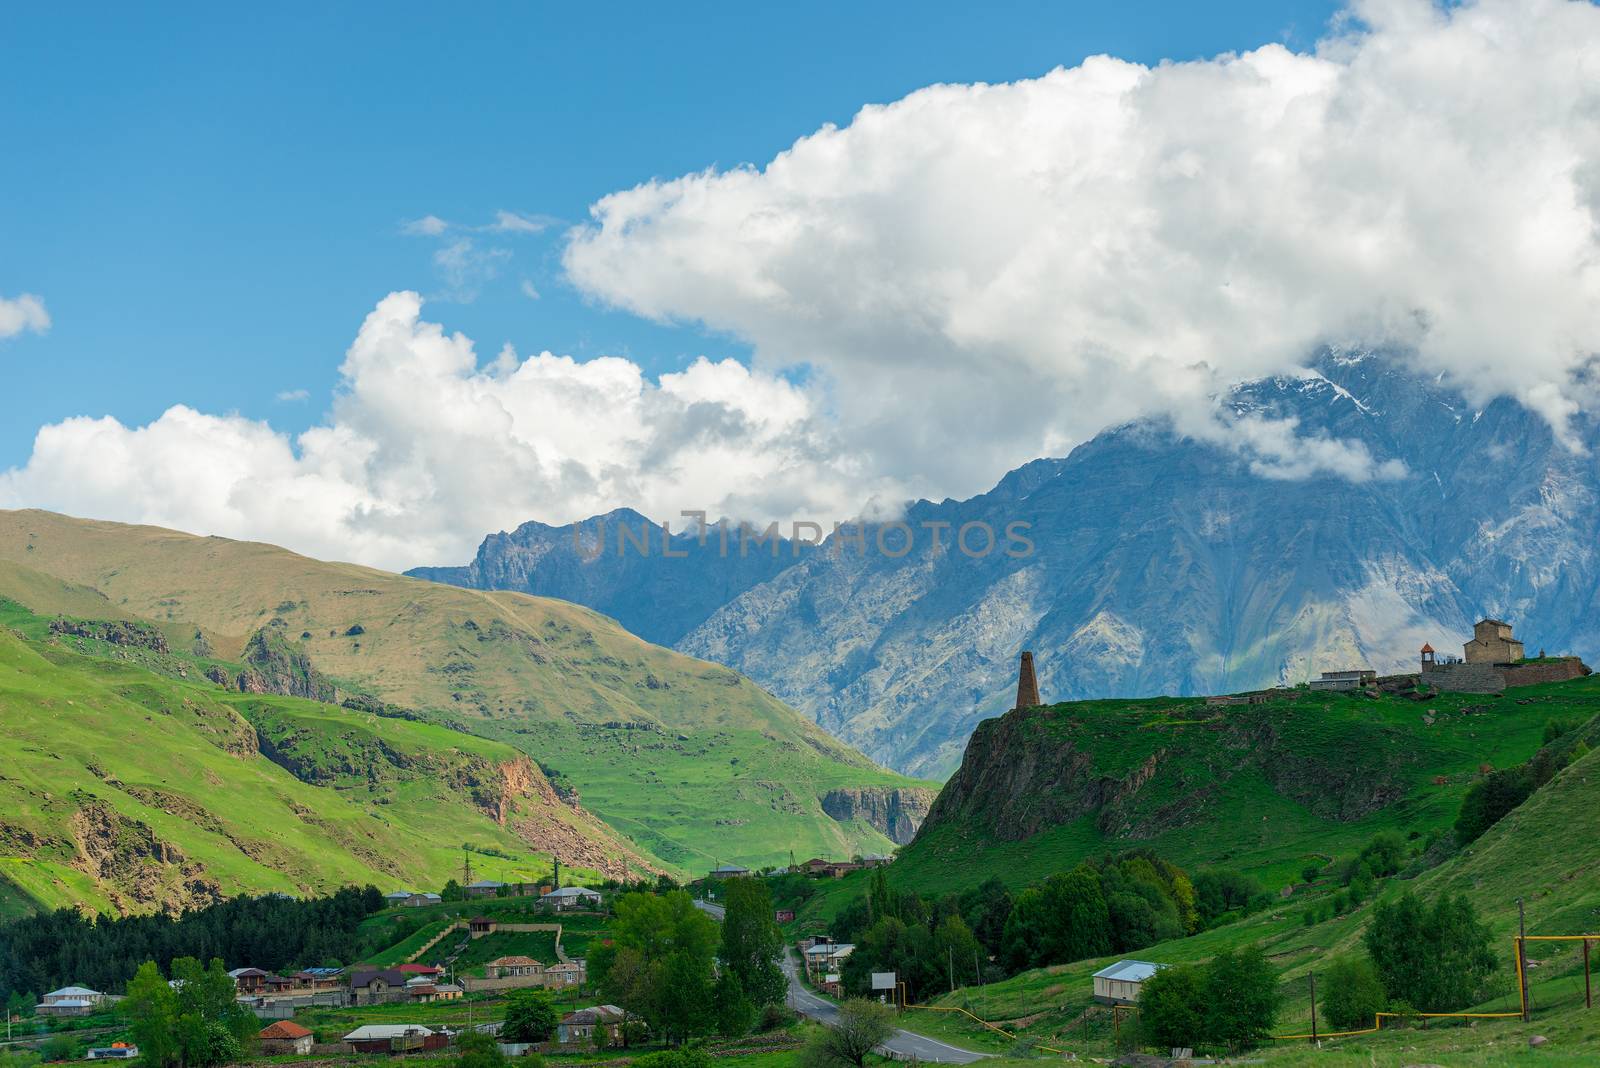 View of the village in the Caucasus, Georgia, a trip along the G by kosmsos111